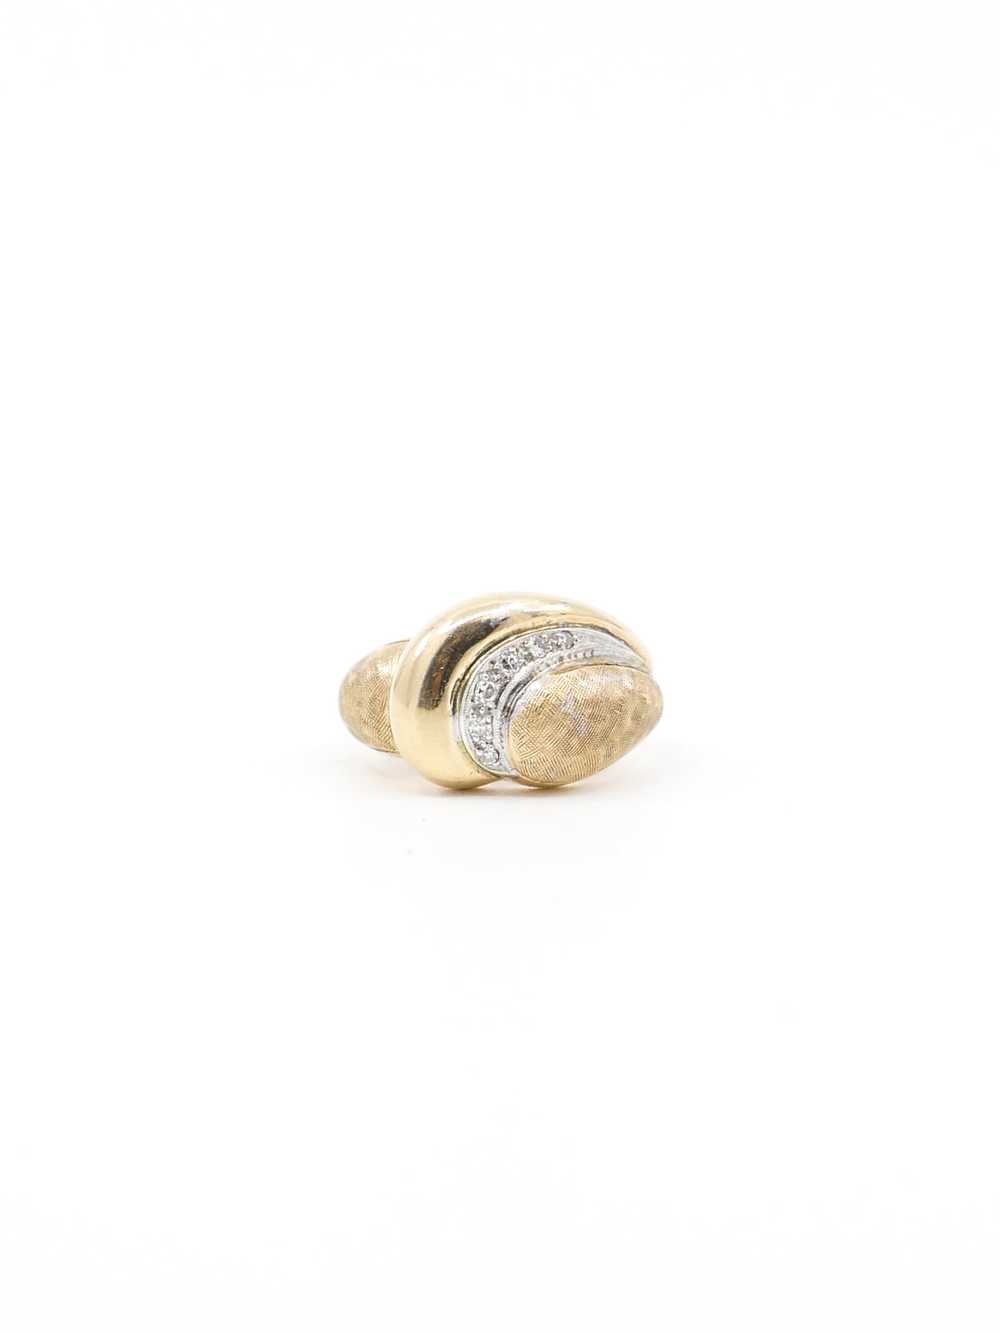 14k Diamond Accented Dome Ring - image 2